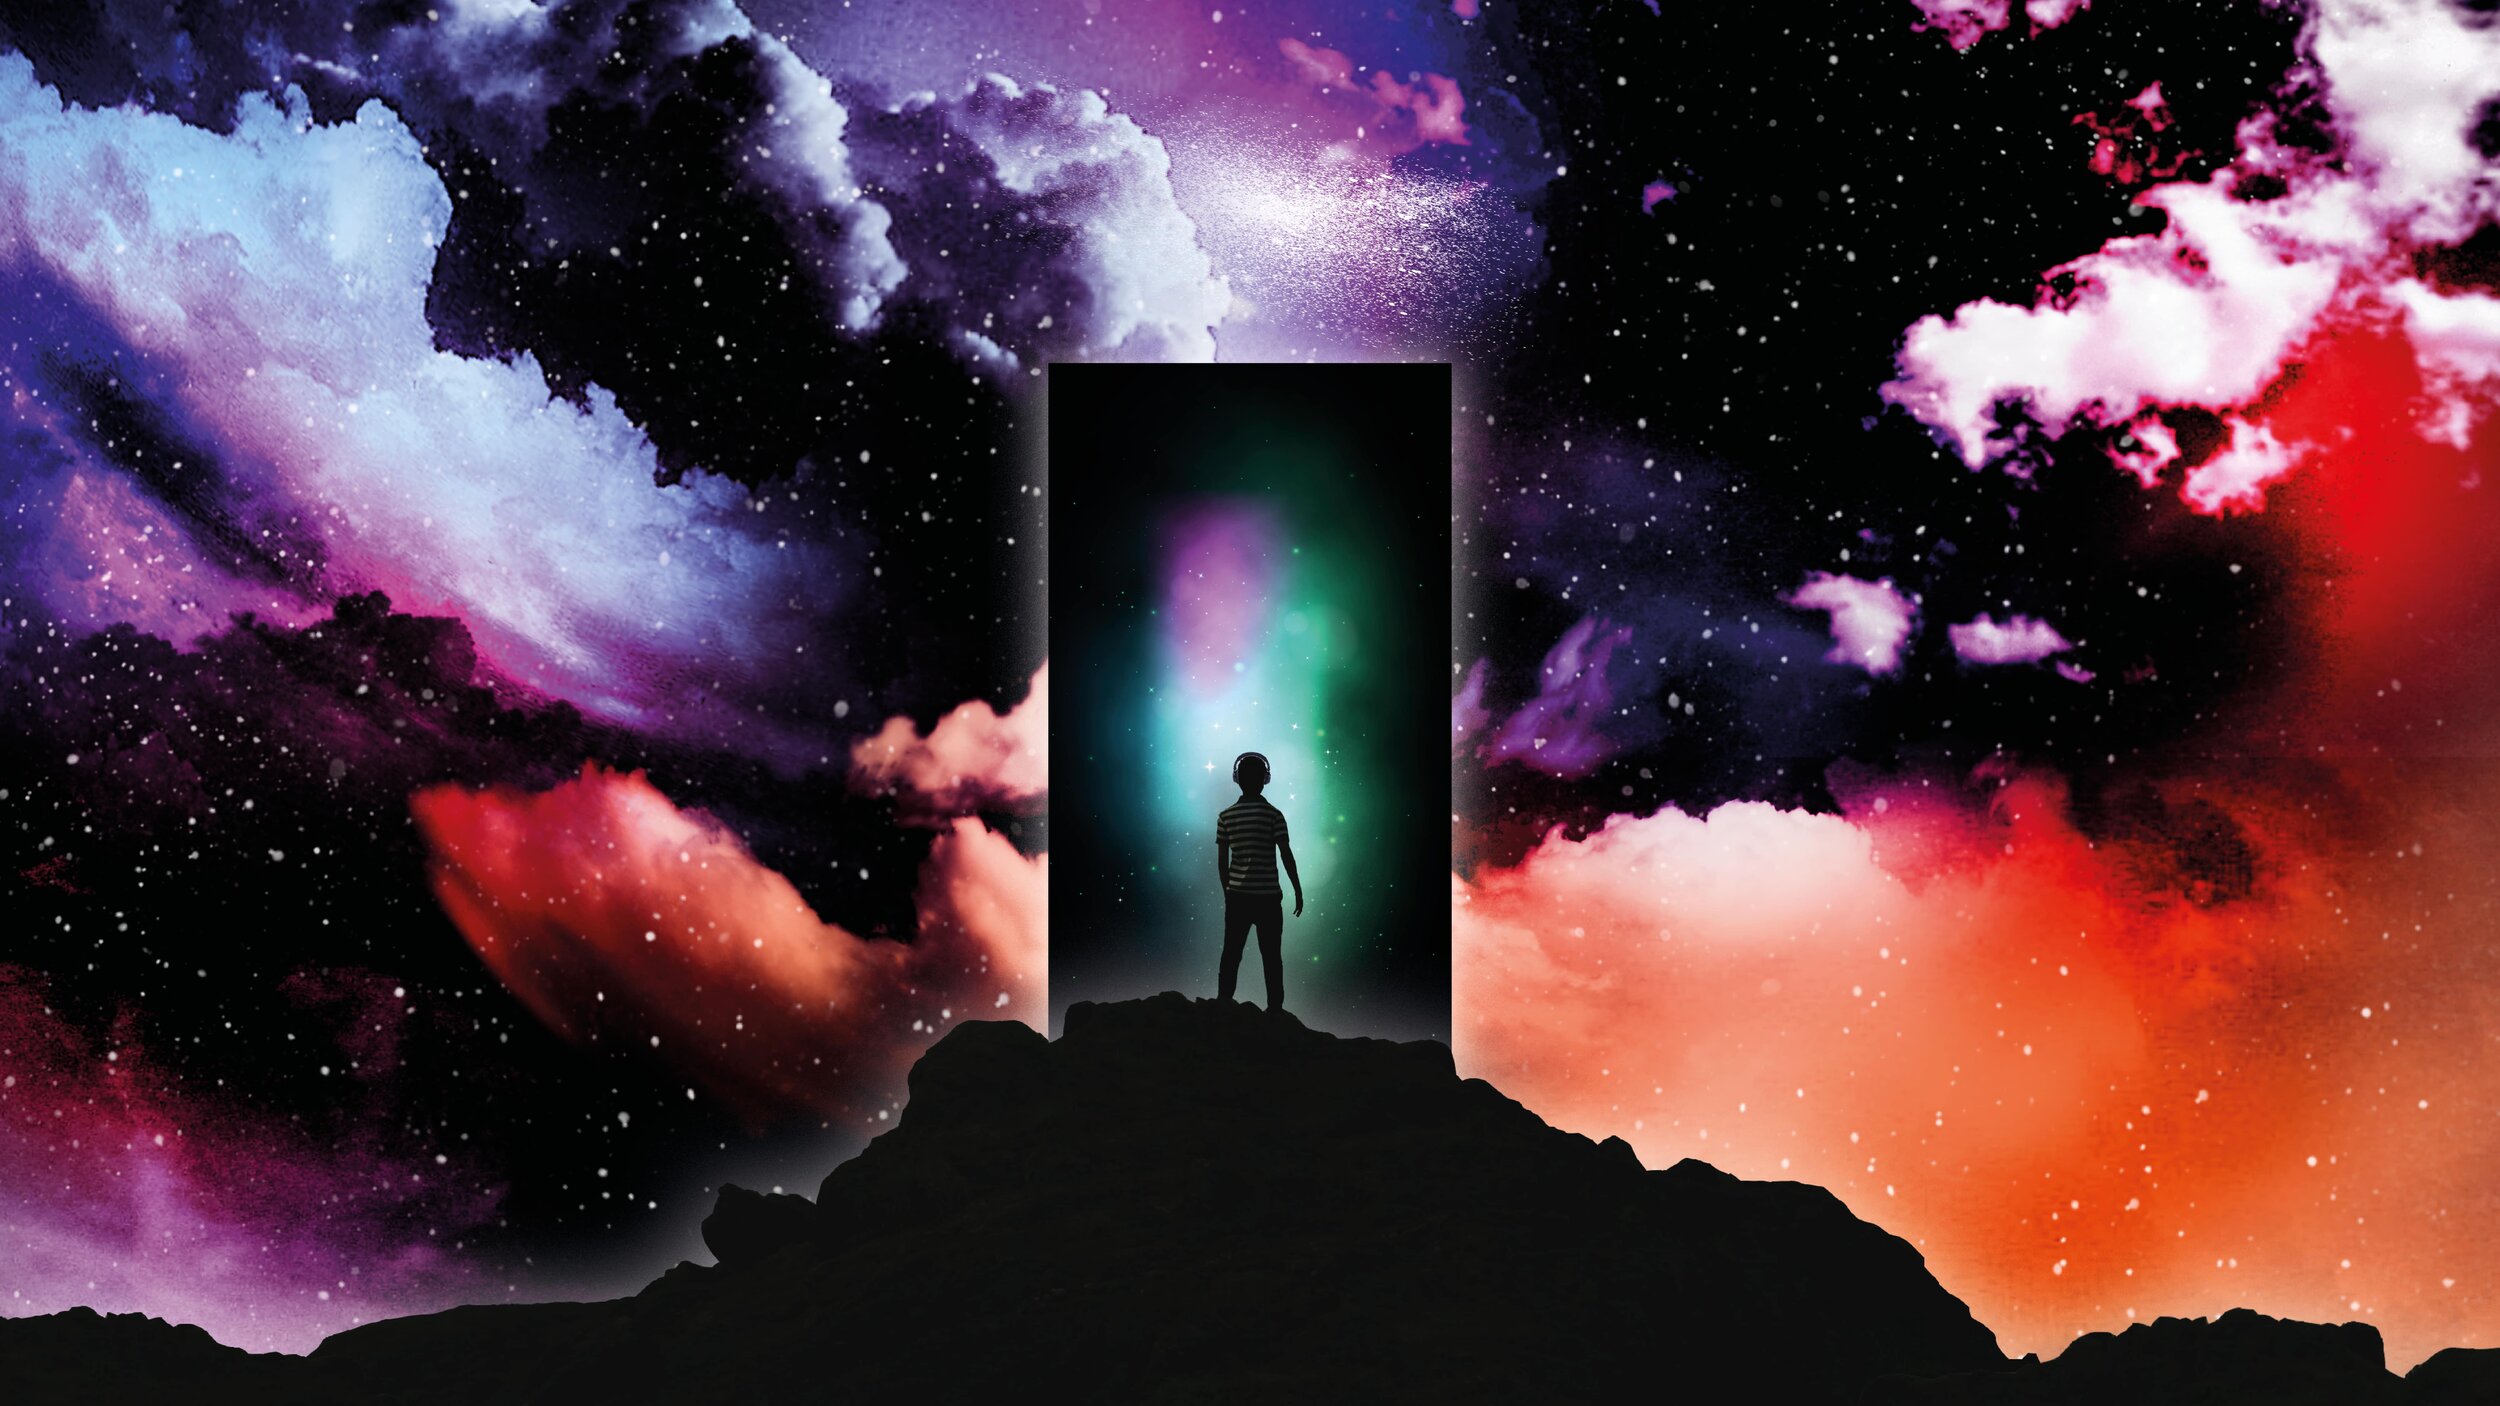 The back of a young person standing upon a rock. The horizon is a starry night sky with colourful clouds. Before them is a rectangular shape - the monolith. Within that we see the northern lights.